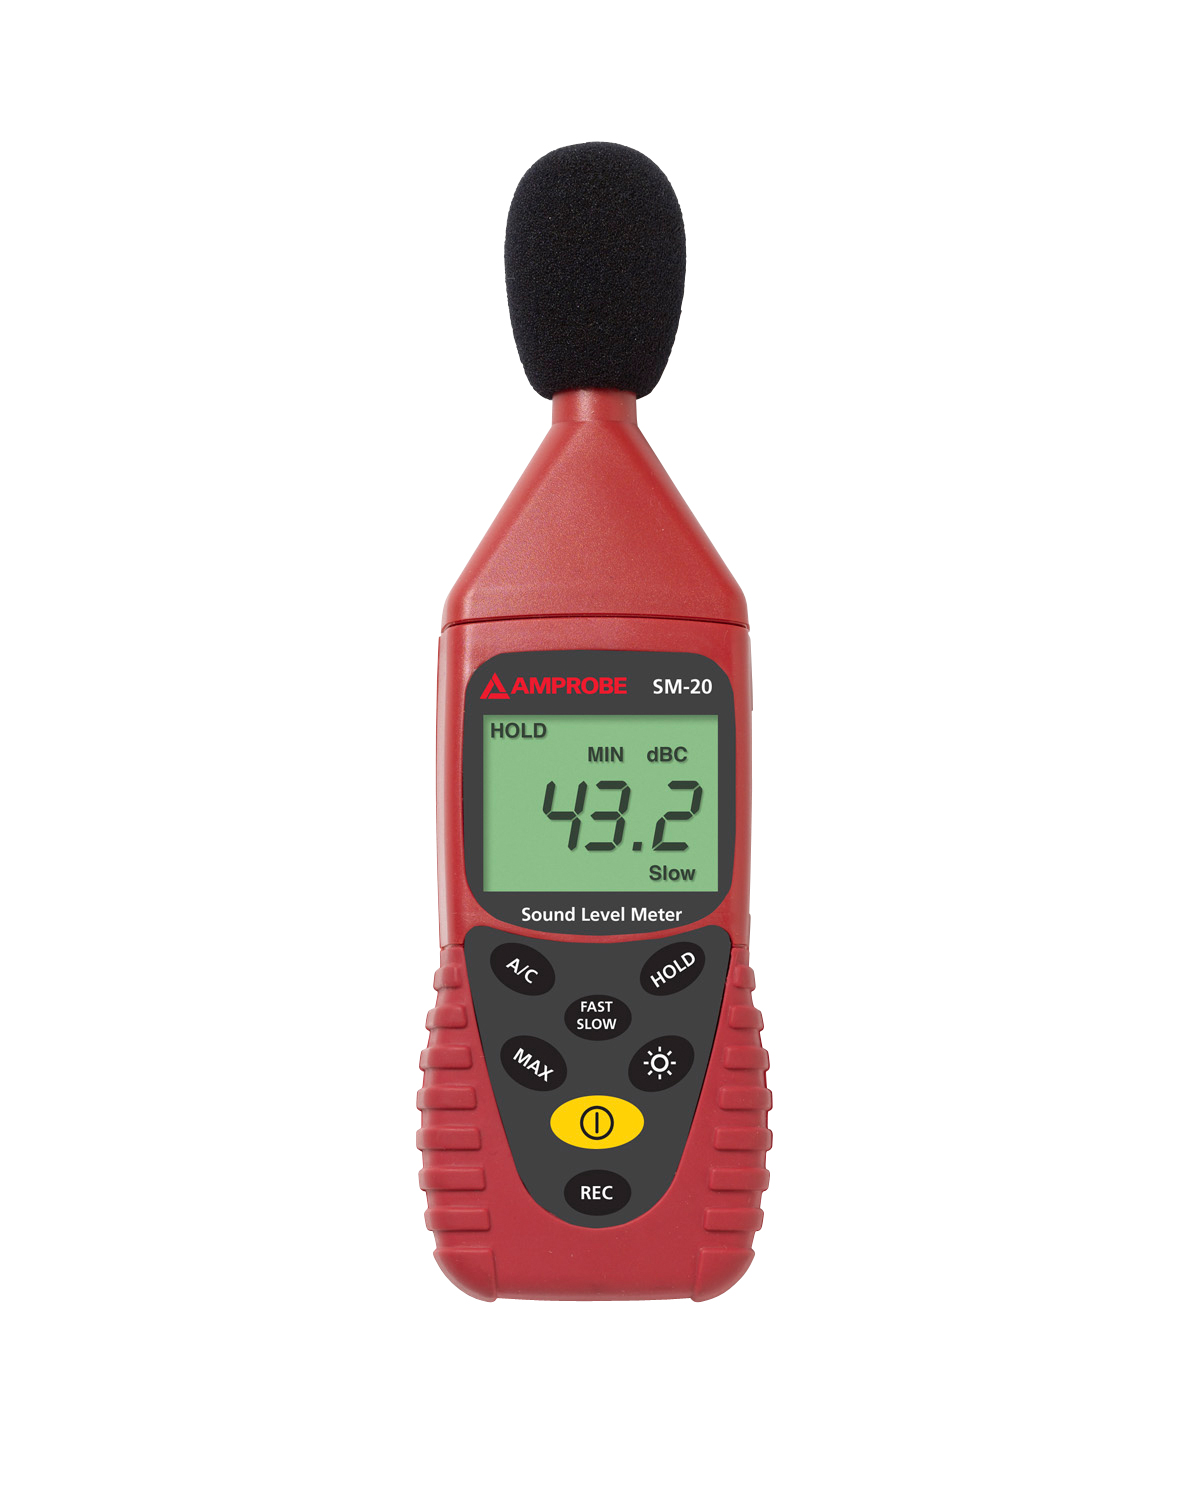 The Amprobe SM-20-A Sound Meter has been designed to check compliance with safety regulations and perform acoustic analysis by safety engineers, health, industrial and safety offices as well as quality control. The SM-20-A offers a PC interface. They use two different weighting filters required by the IEC651 and ANSI S1.4 Type 2 for audio filtering. The A weighting is for general noise sound level and the C weighting is for measuring sound level of acoustic material control in various environments (ie 94dB 1 kHz etc).